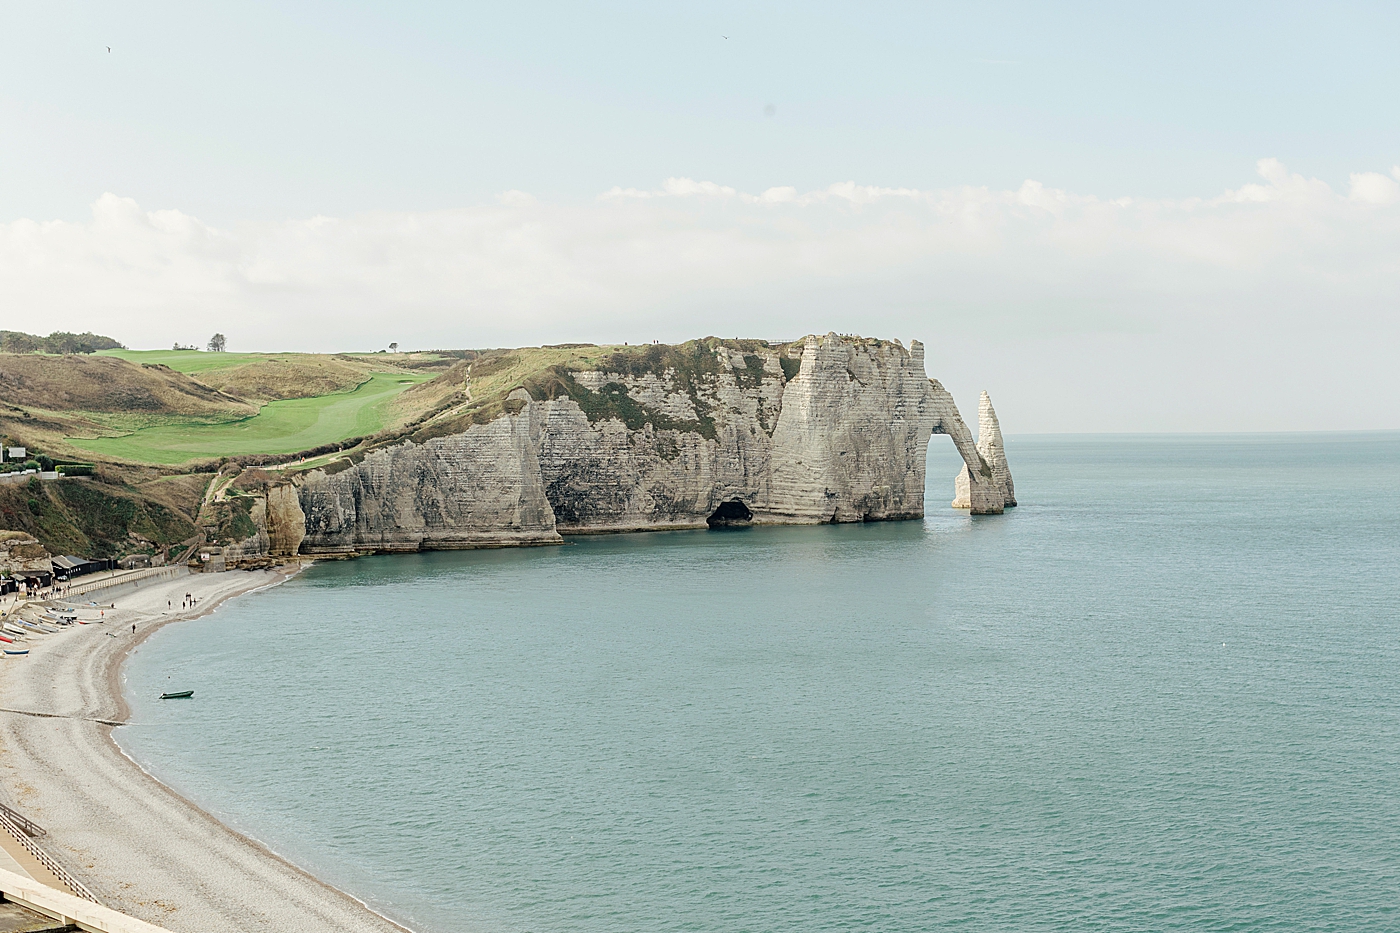 View of an empty French beach with cliffs in the back ground, calm water, and boats sitting on shore during a trip with France Wedding Photographer Hope Helmuth Photography